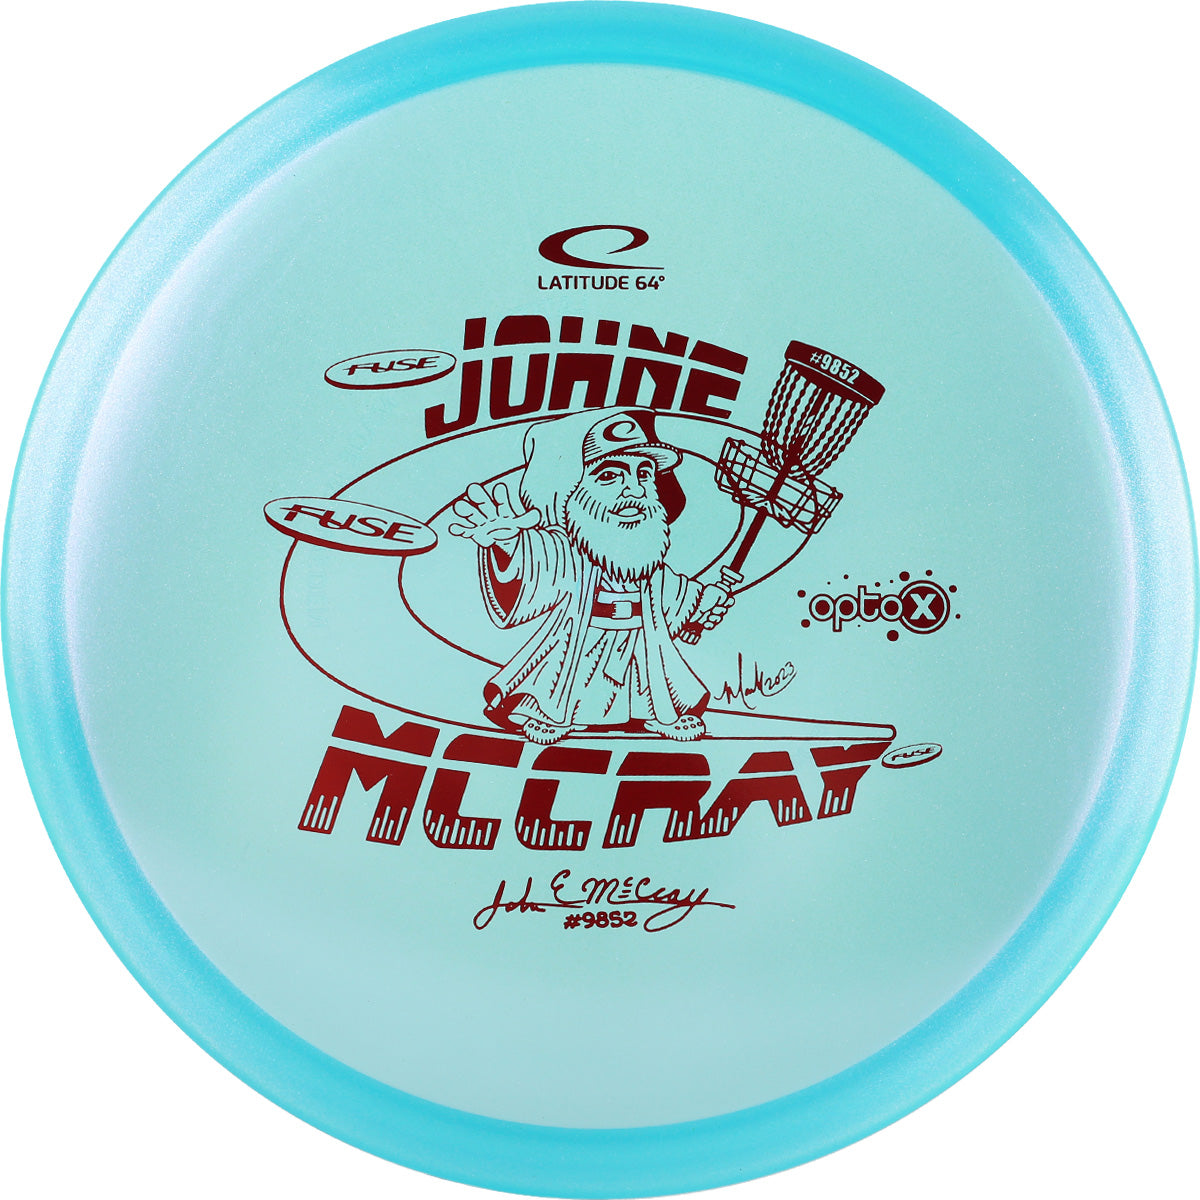 Opto-X Glimmer Fuse - JohnE McCray Team Series 2024